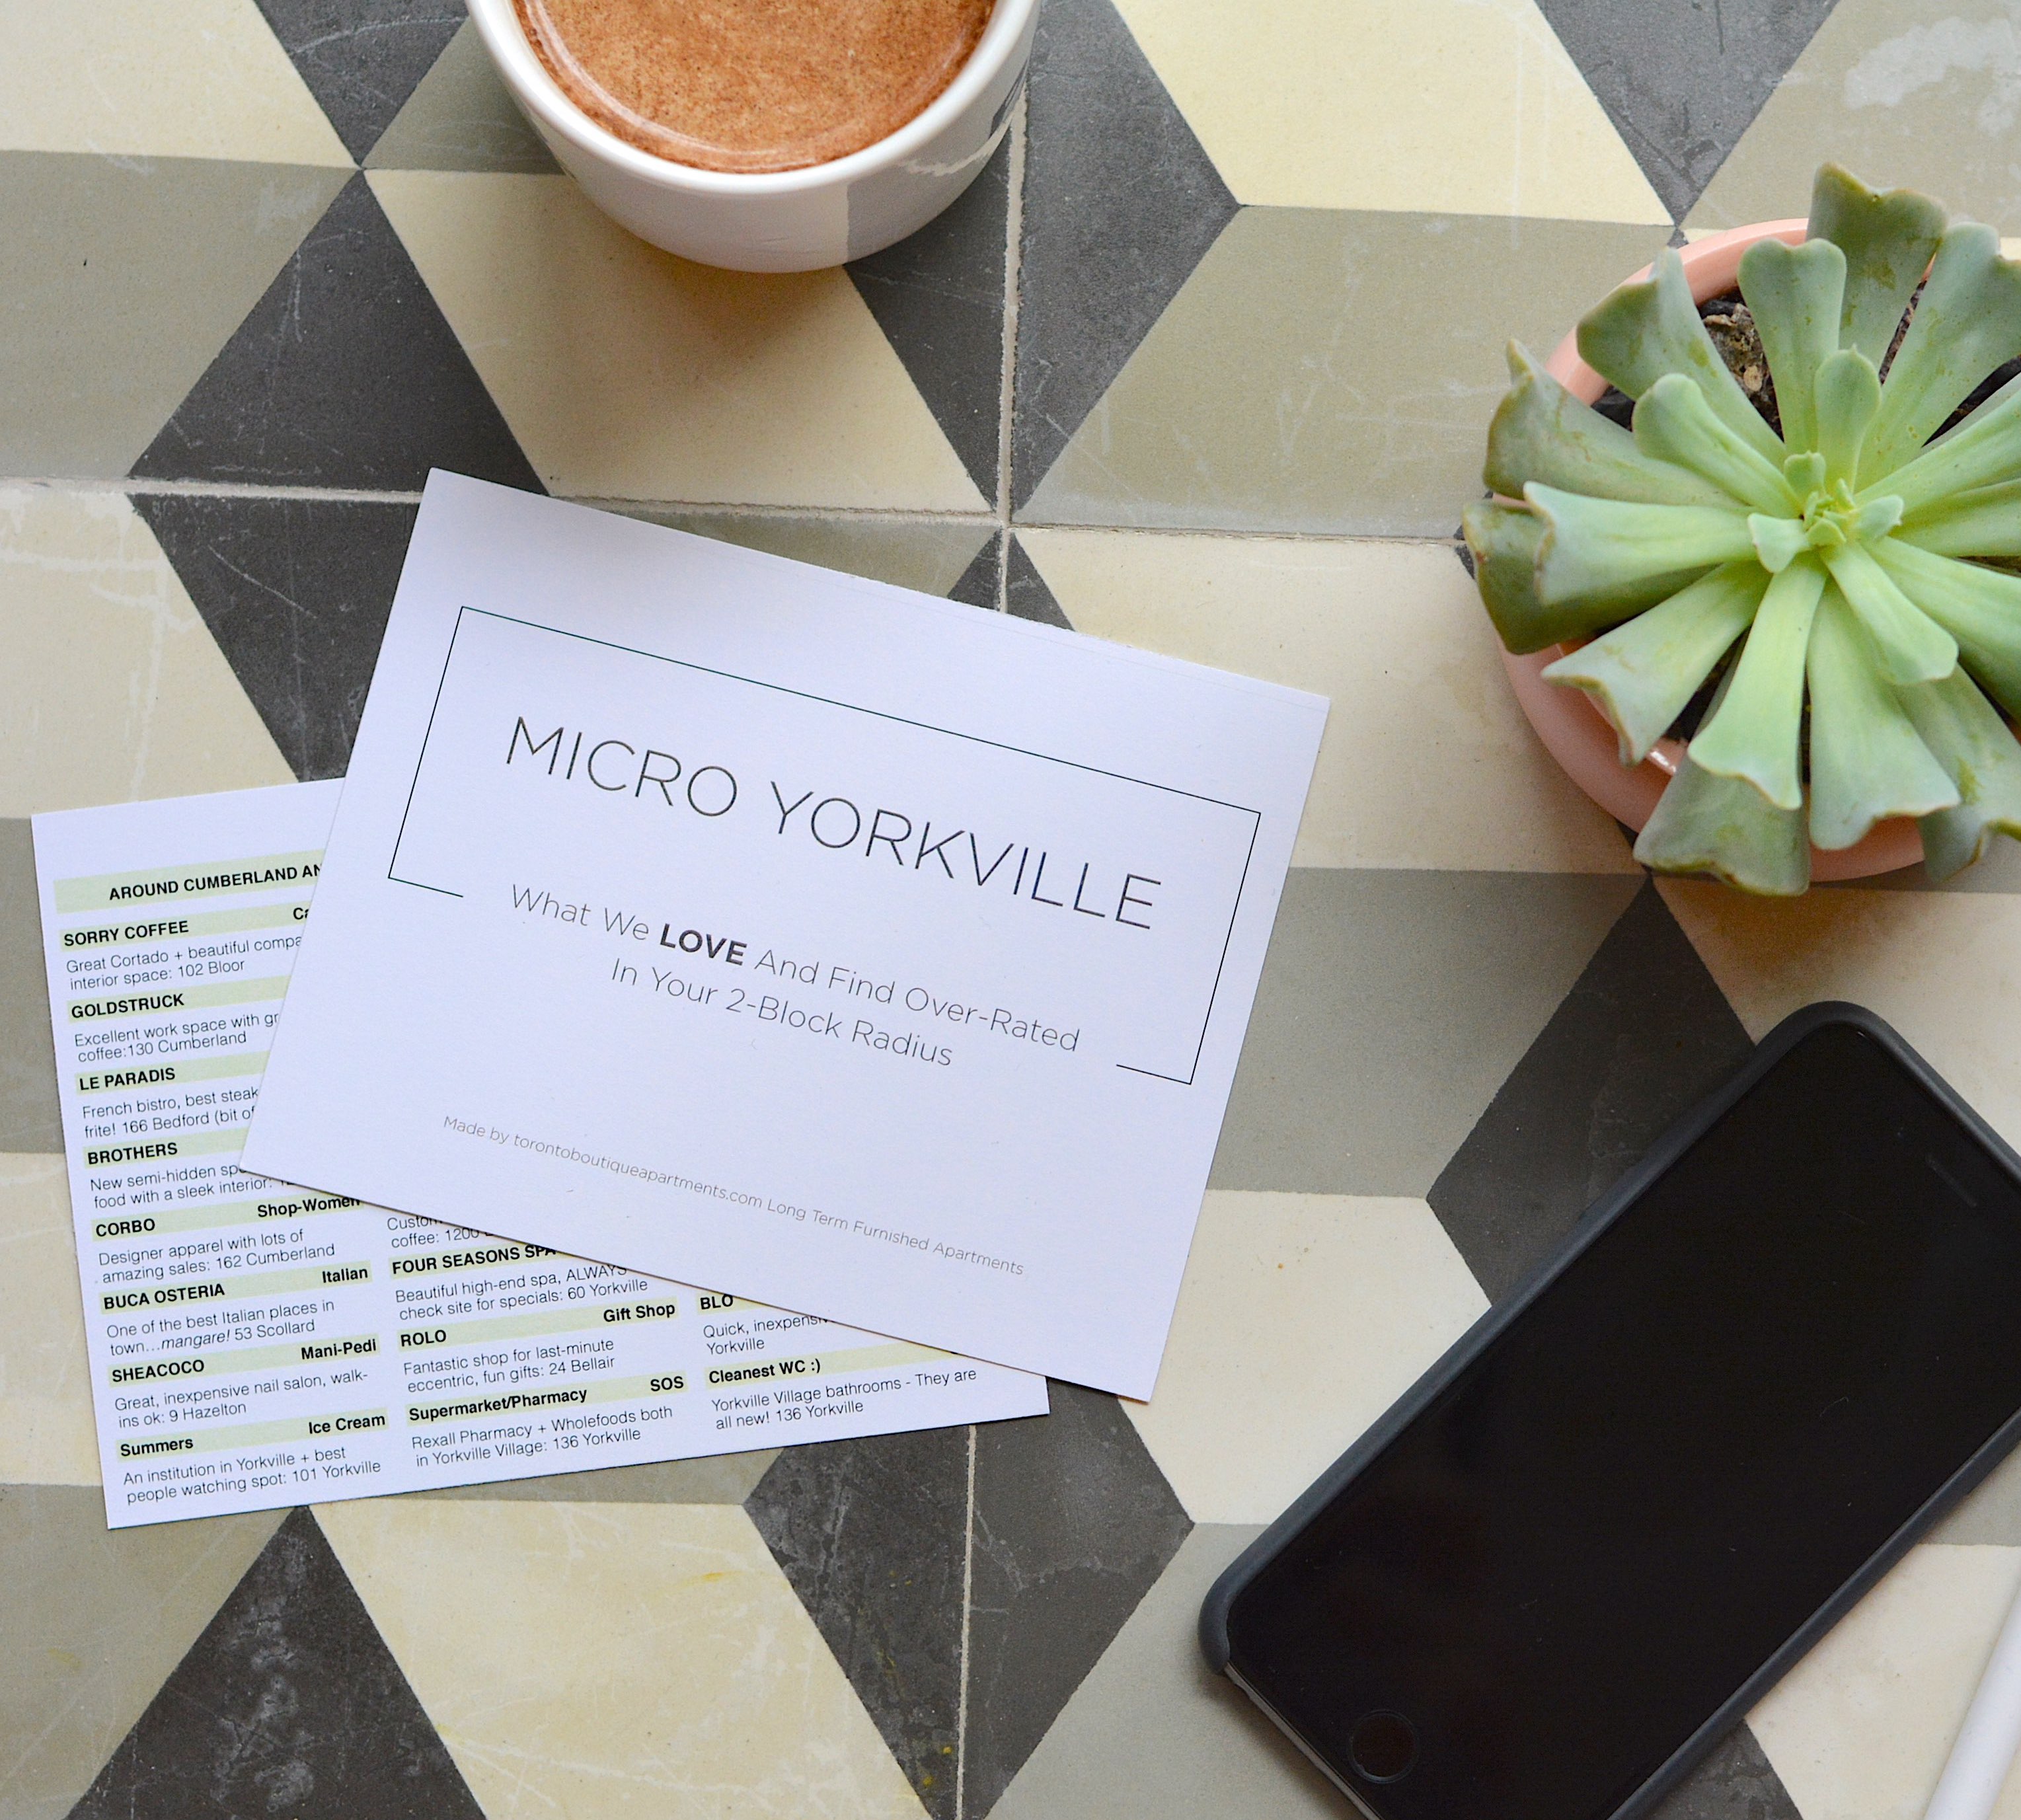 Yorkville Micro Guide in digital format or post card